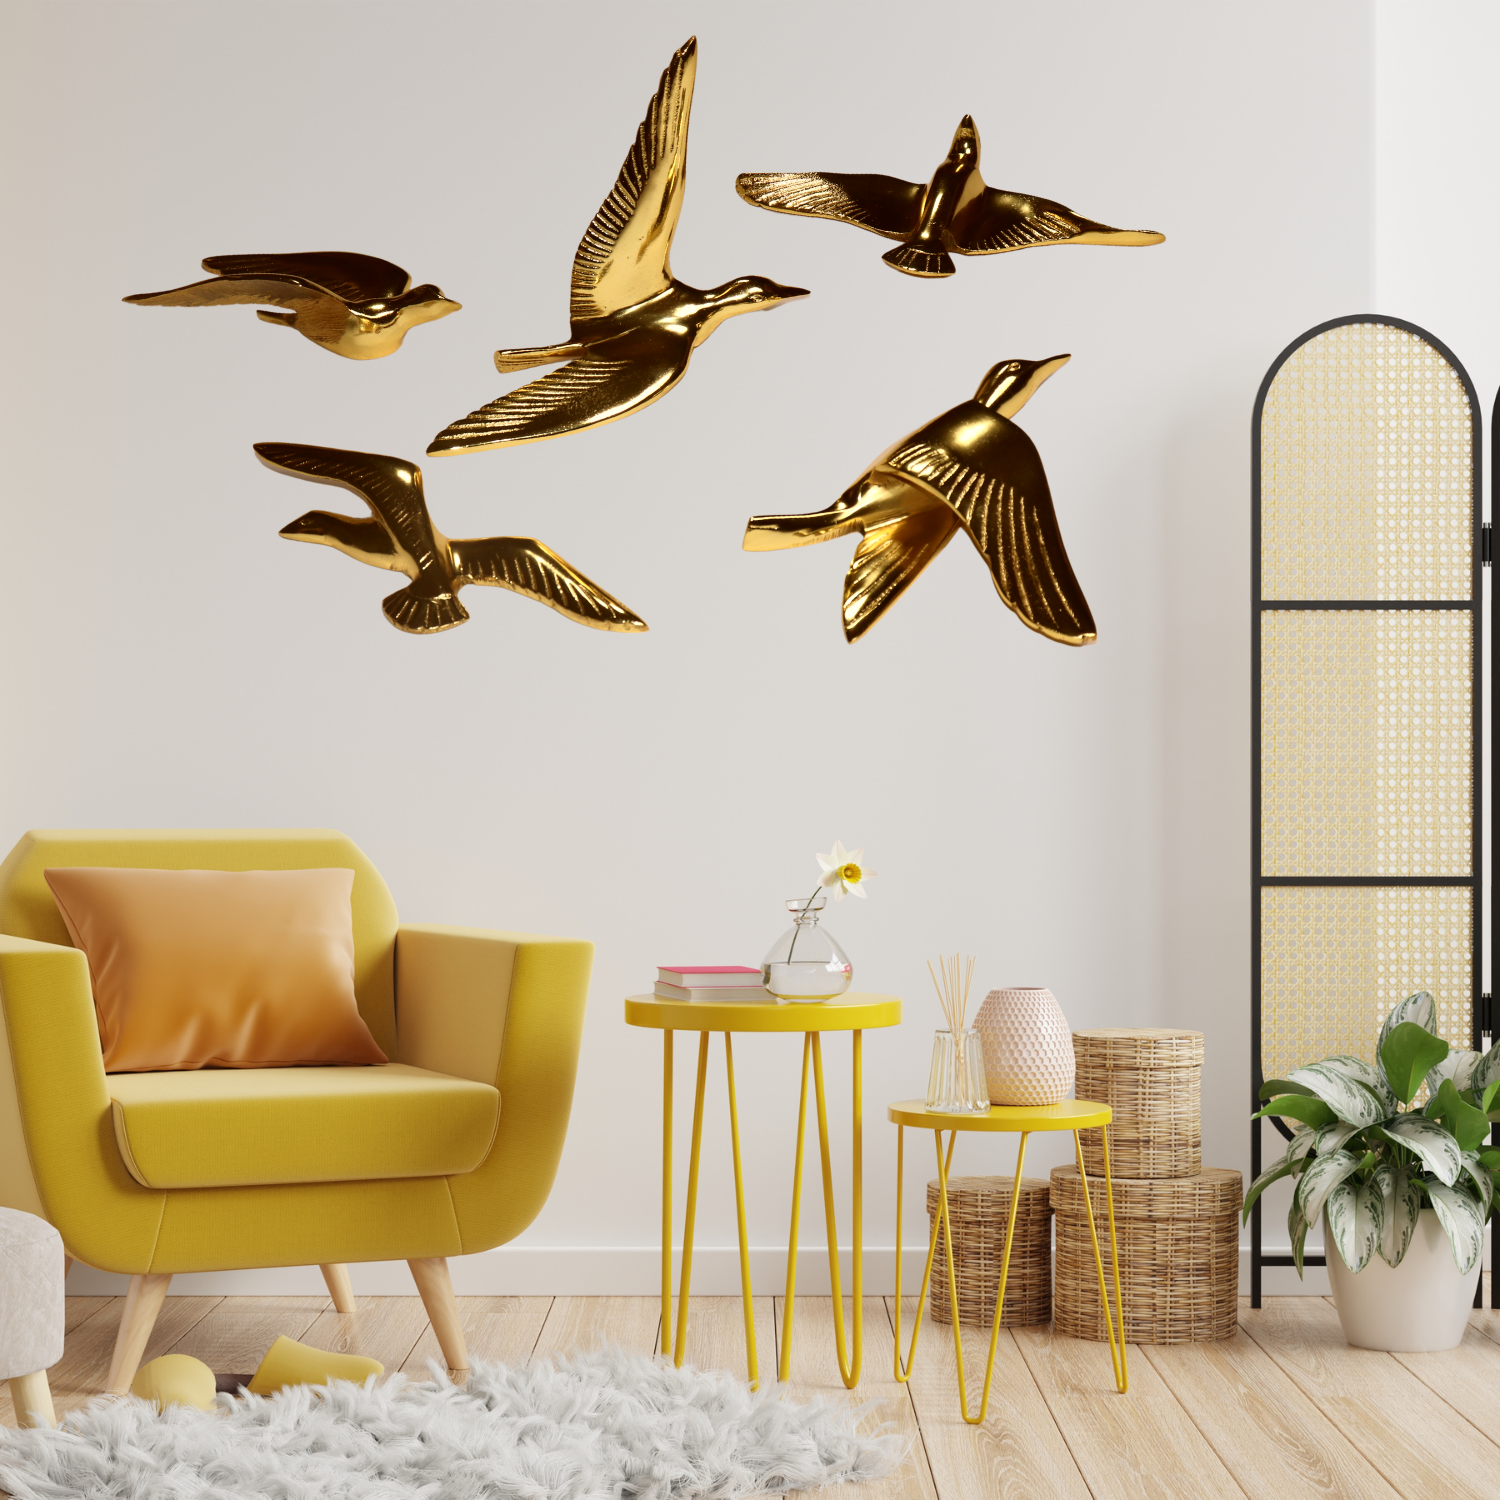 The Chirping Soul -Birds Wall Mount Décor (set of 5) Gold - LOOSEBUCKET